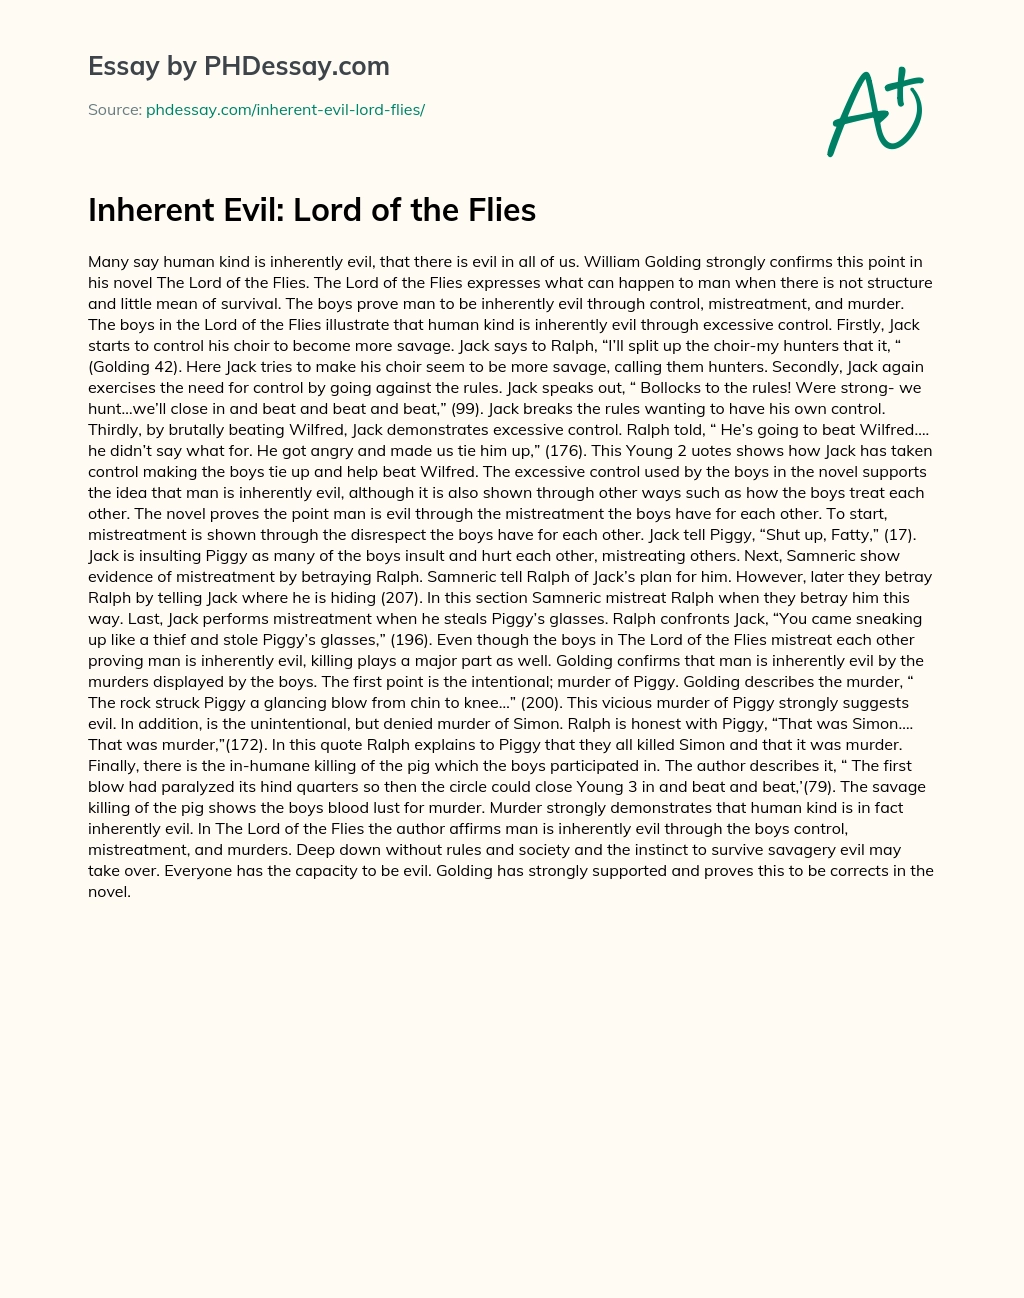 man's inherent evil lord of the flies essay